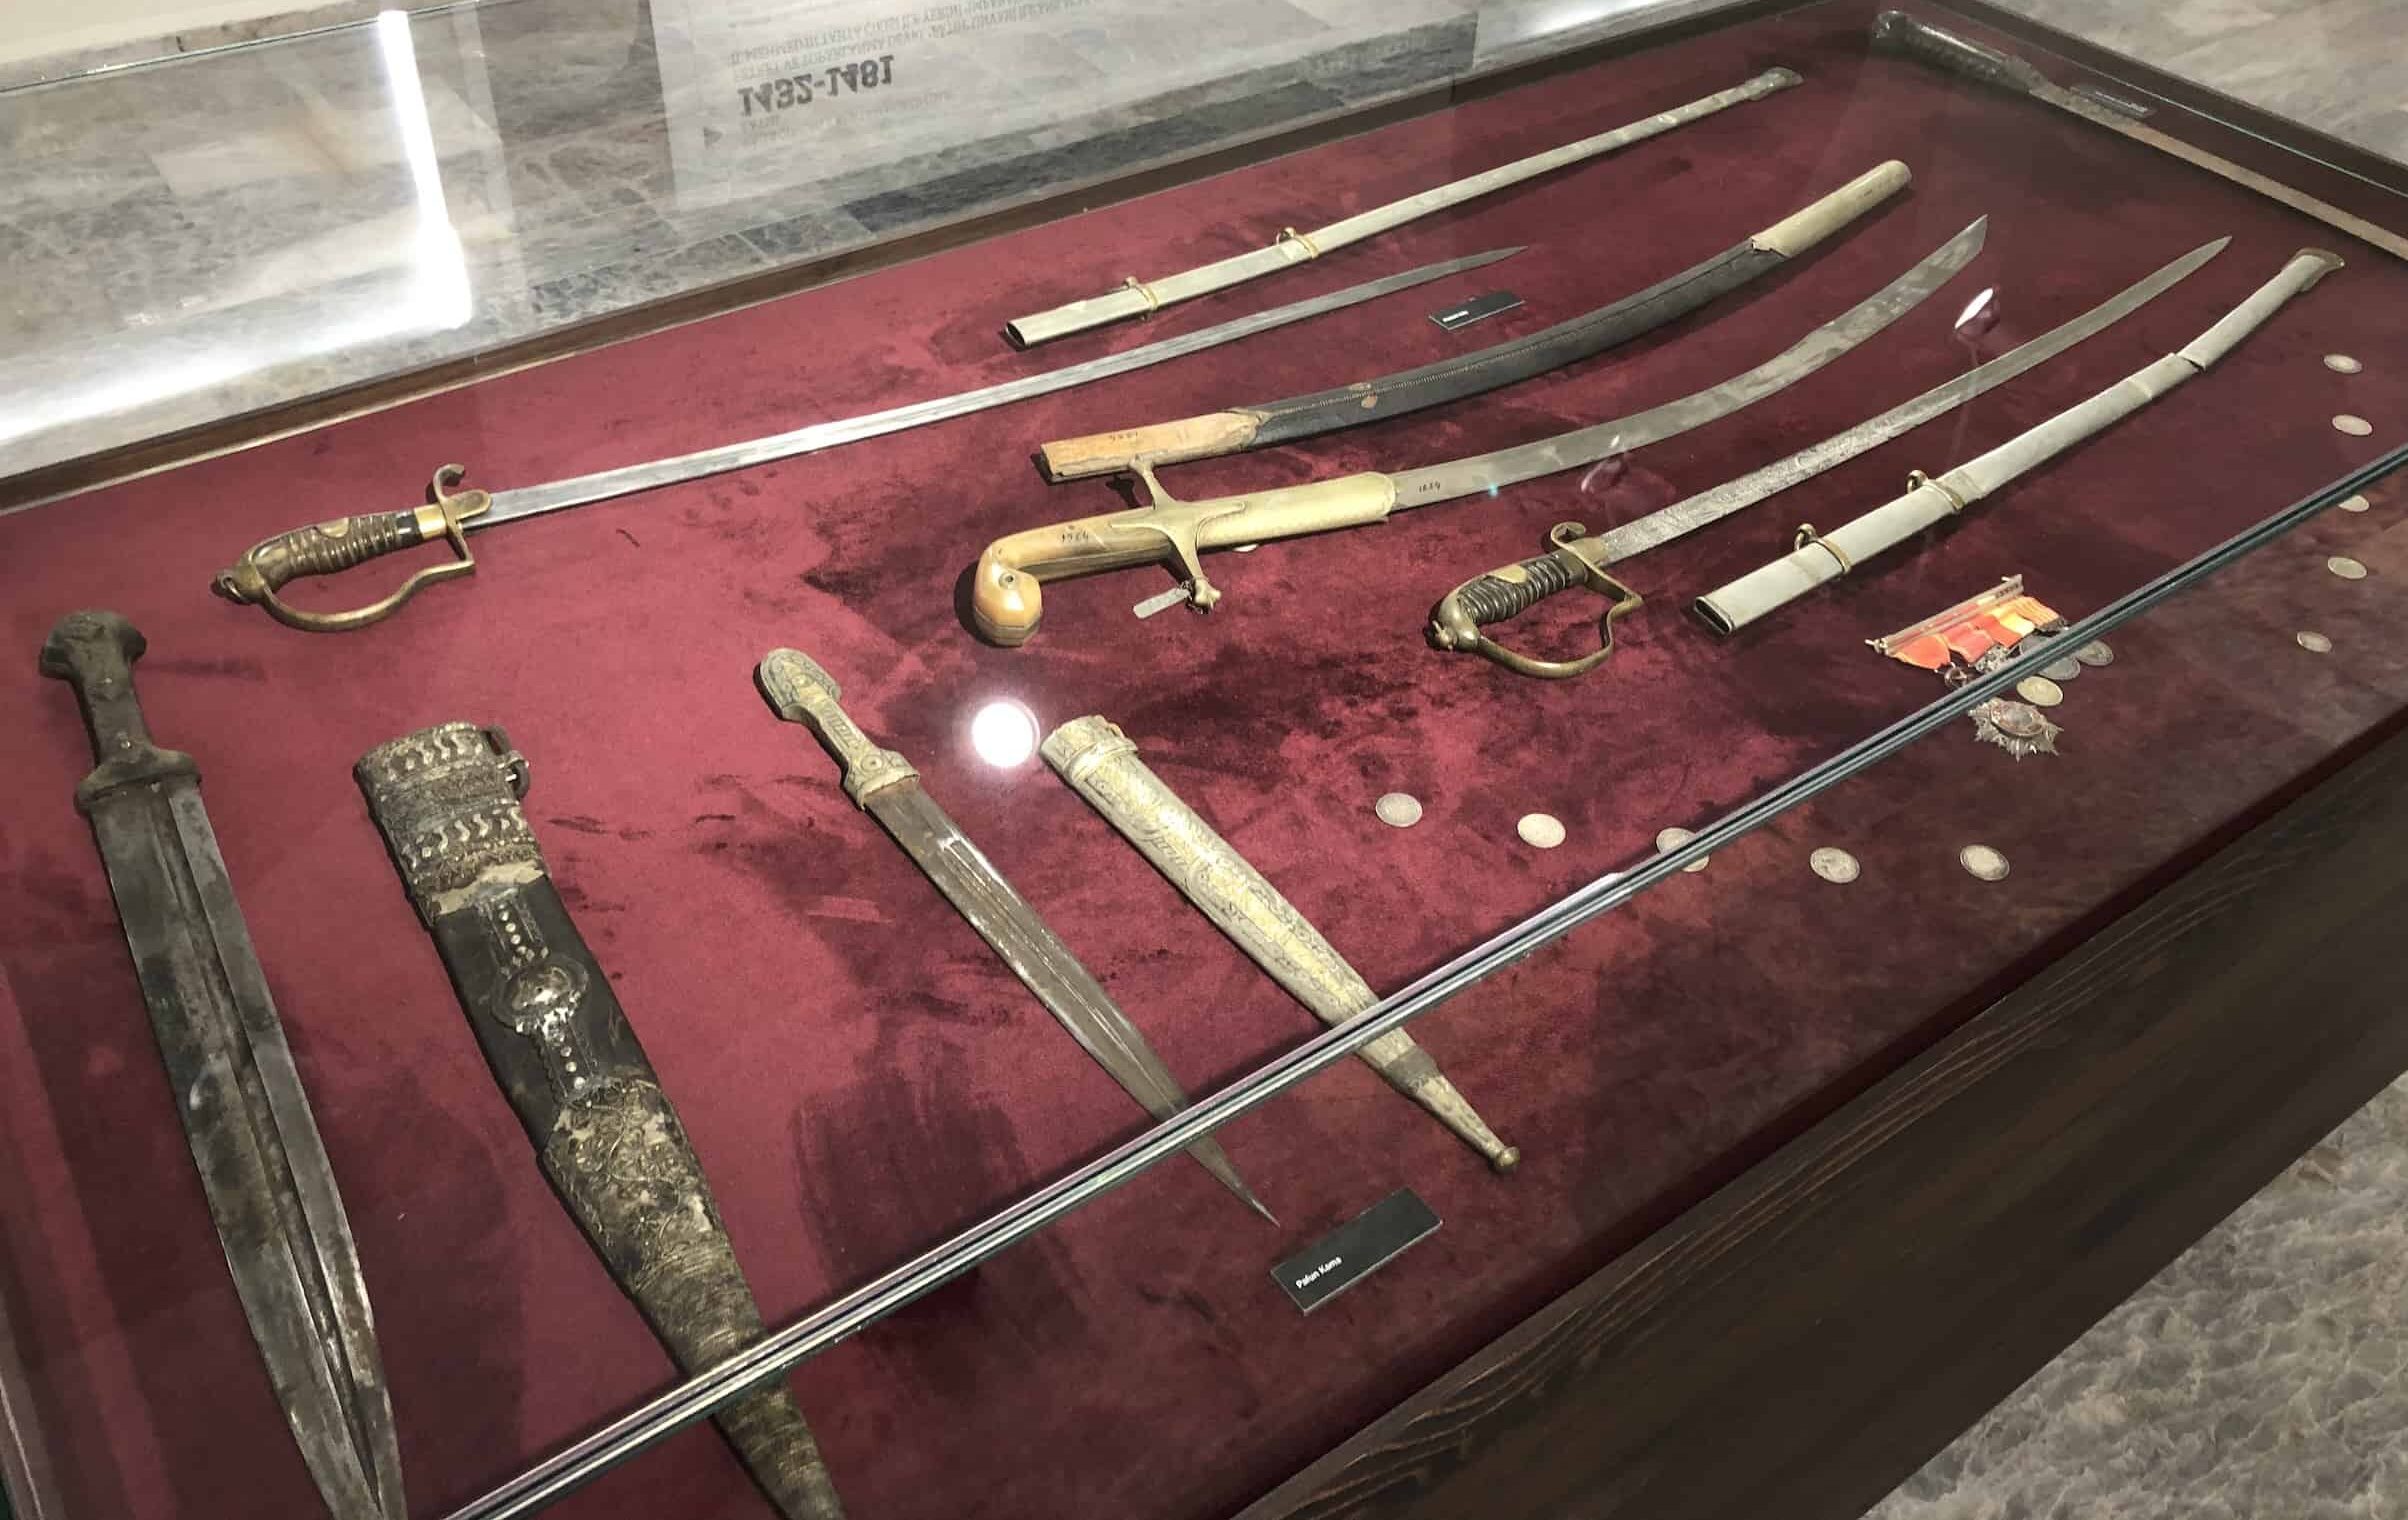 Swords, daggers, coins, and medals at the Anadolu University Republic History Museum